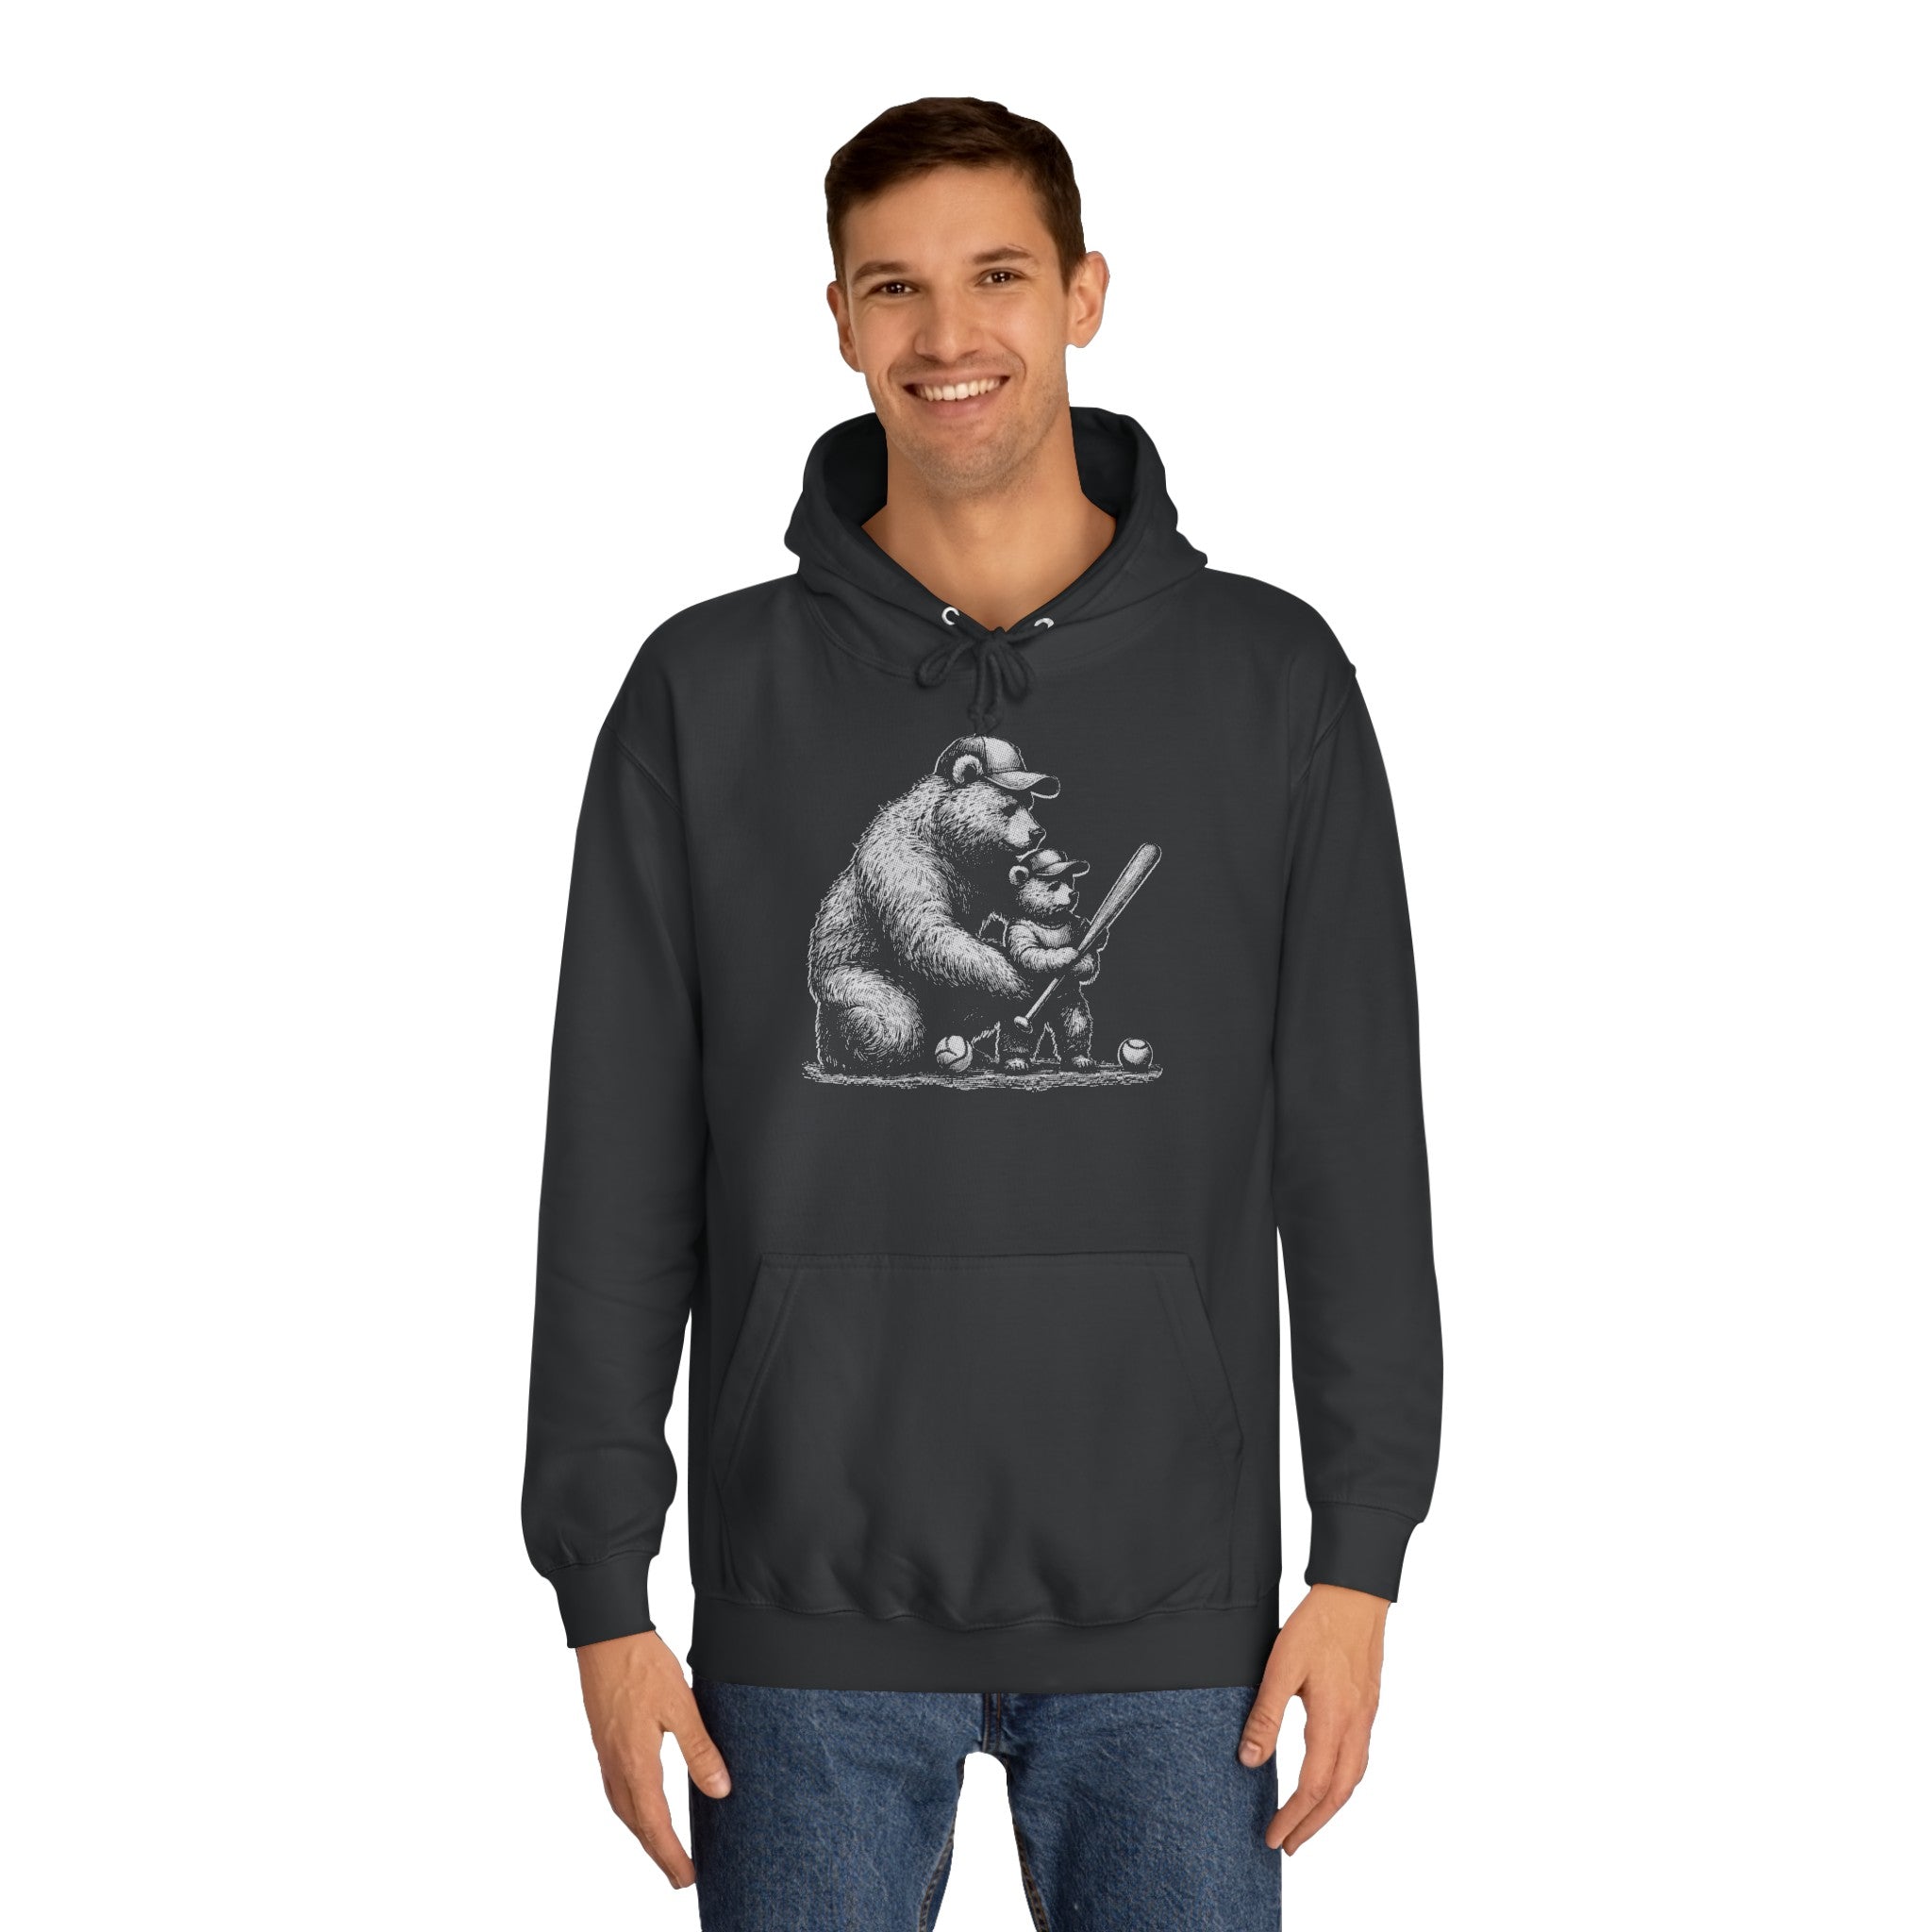 BEAR DAD AND SON Unisex College Hoodie